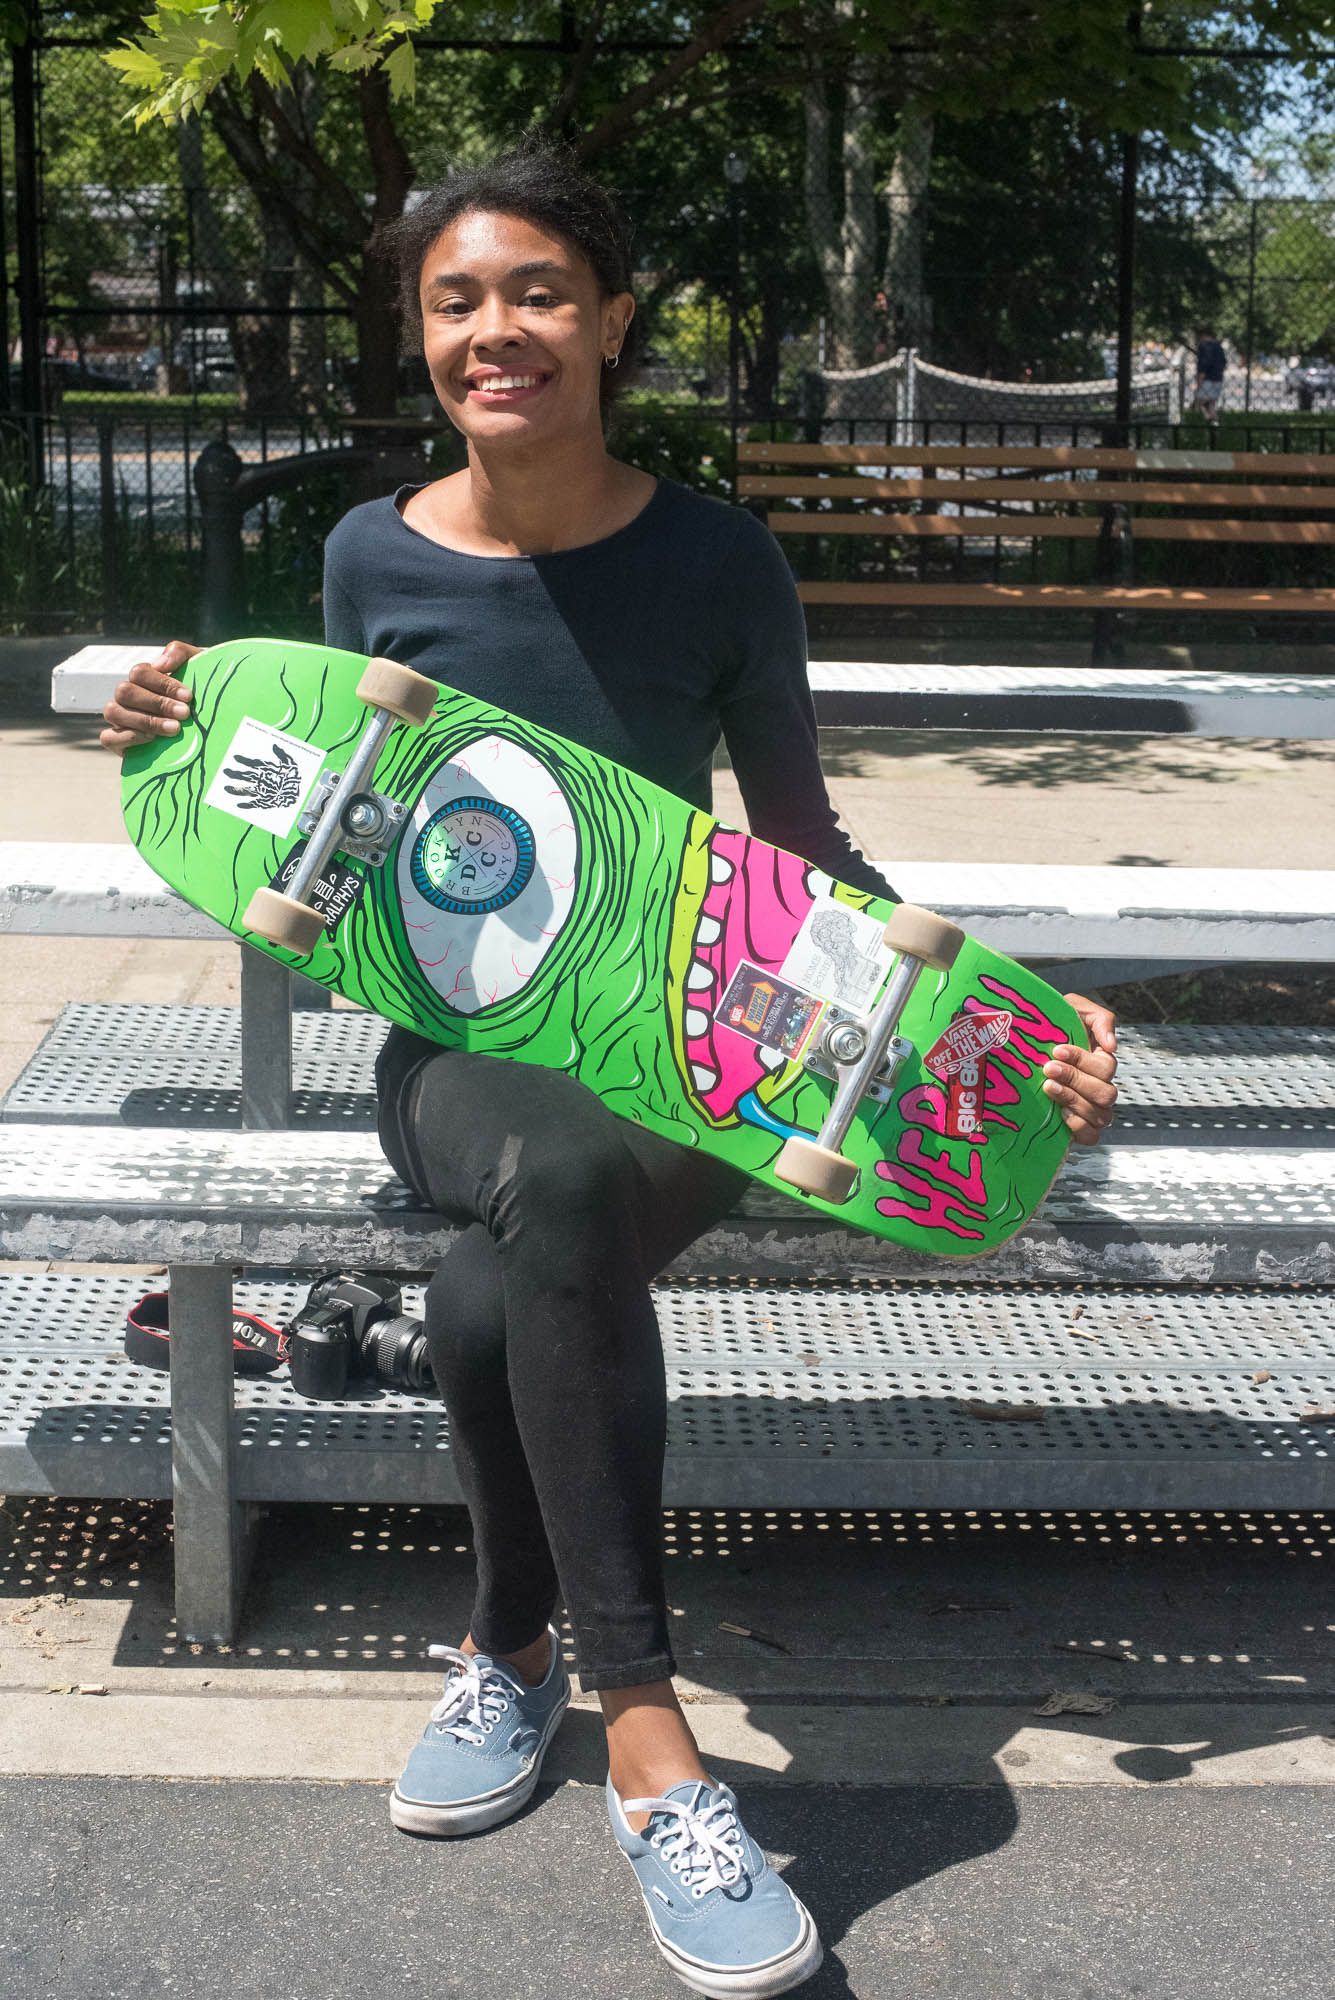 Moore wears all black, sitting on the bleachers showing off her skateboard that has a lime green and pink alien-like creature on it..